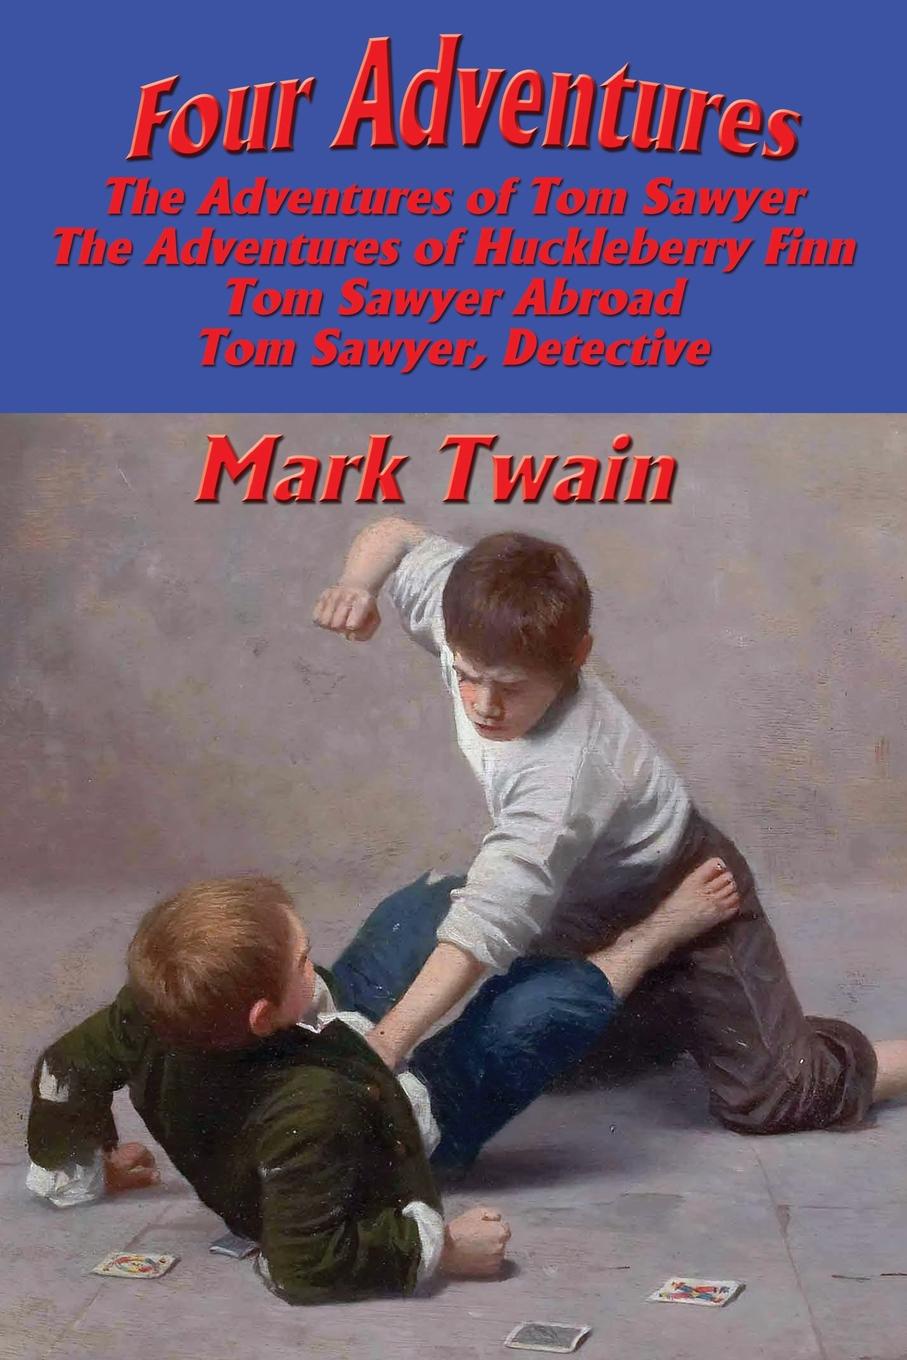 Four Adventures. simpler time. Collected here in one omnibus edition  are all four of the books in this series: The Adventures of Tom Sawyer, The Adventures of Huckleberry Finn, Tom Sawyer Abroad, and Tom Sawyer, Detective